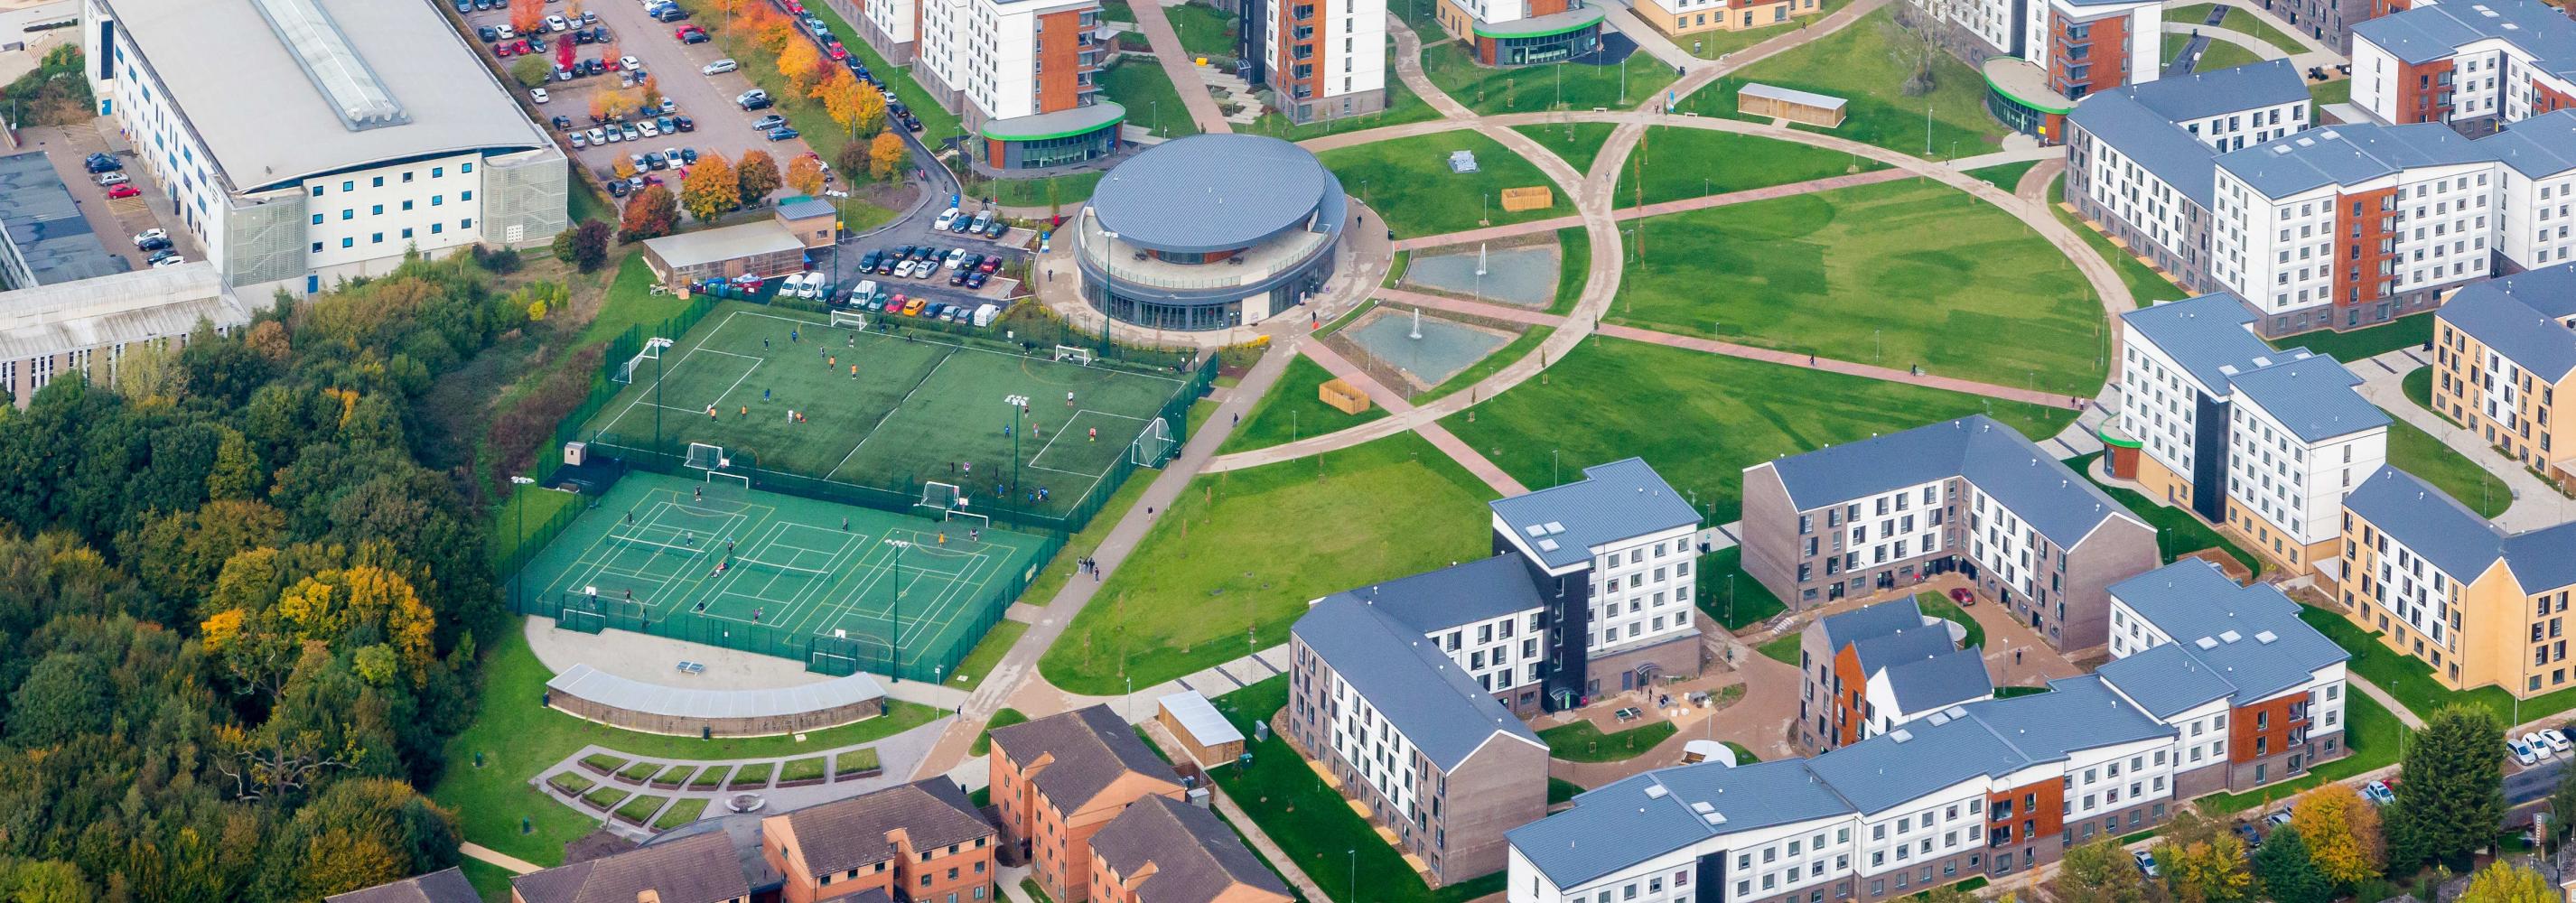 Aerial view of College Lane campus accommodation